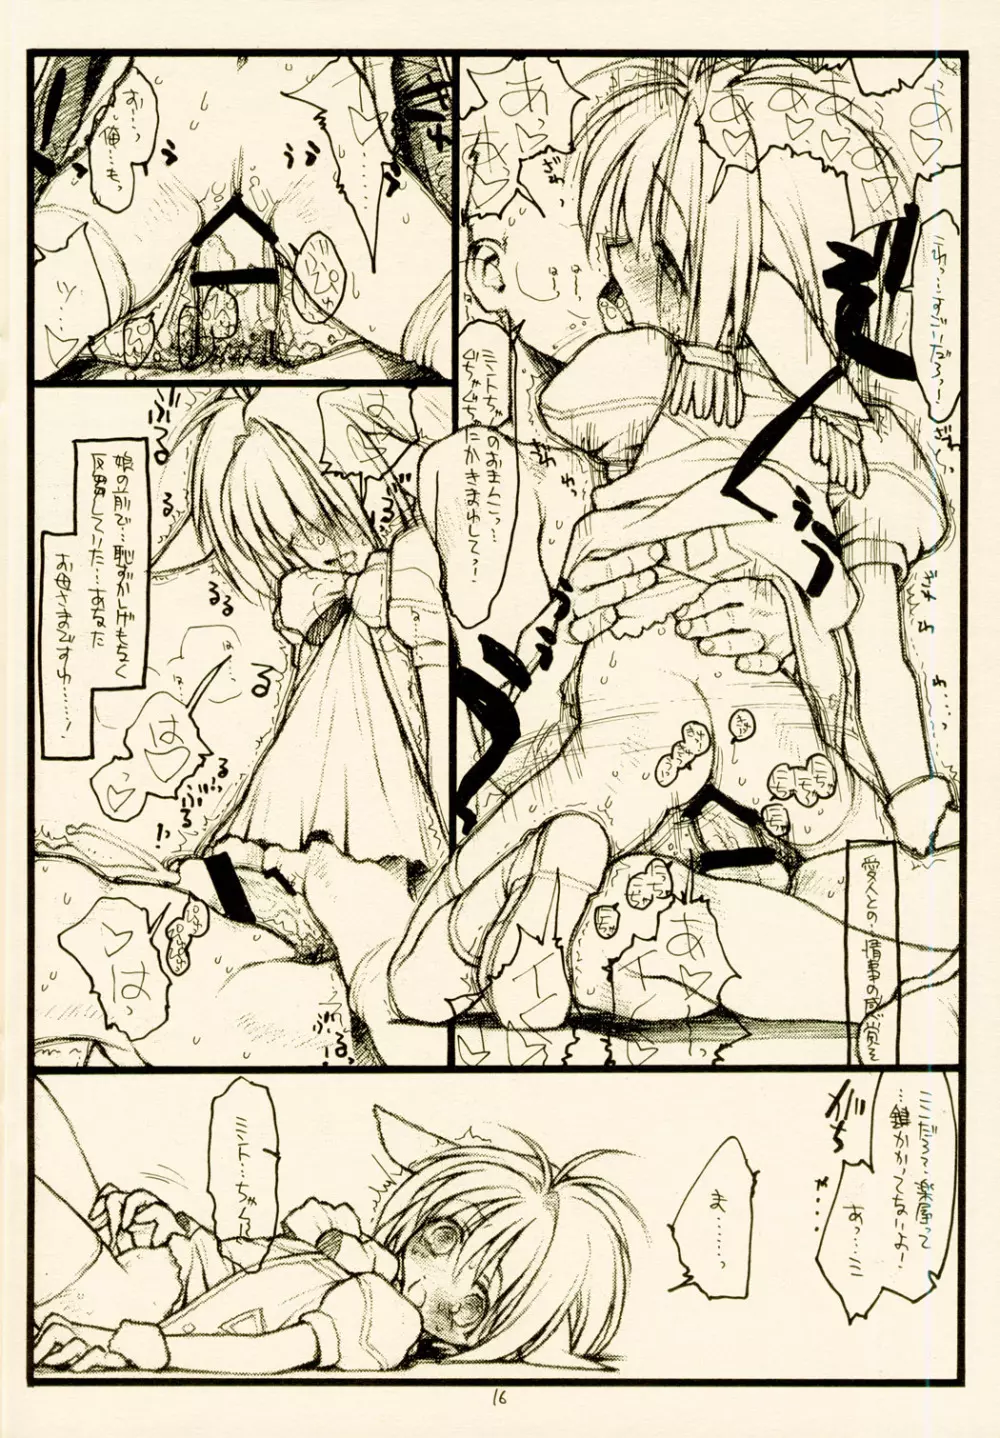 Mint-Erotic Page.16